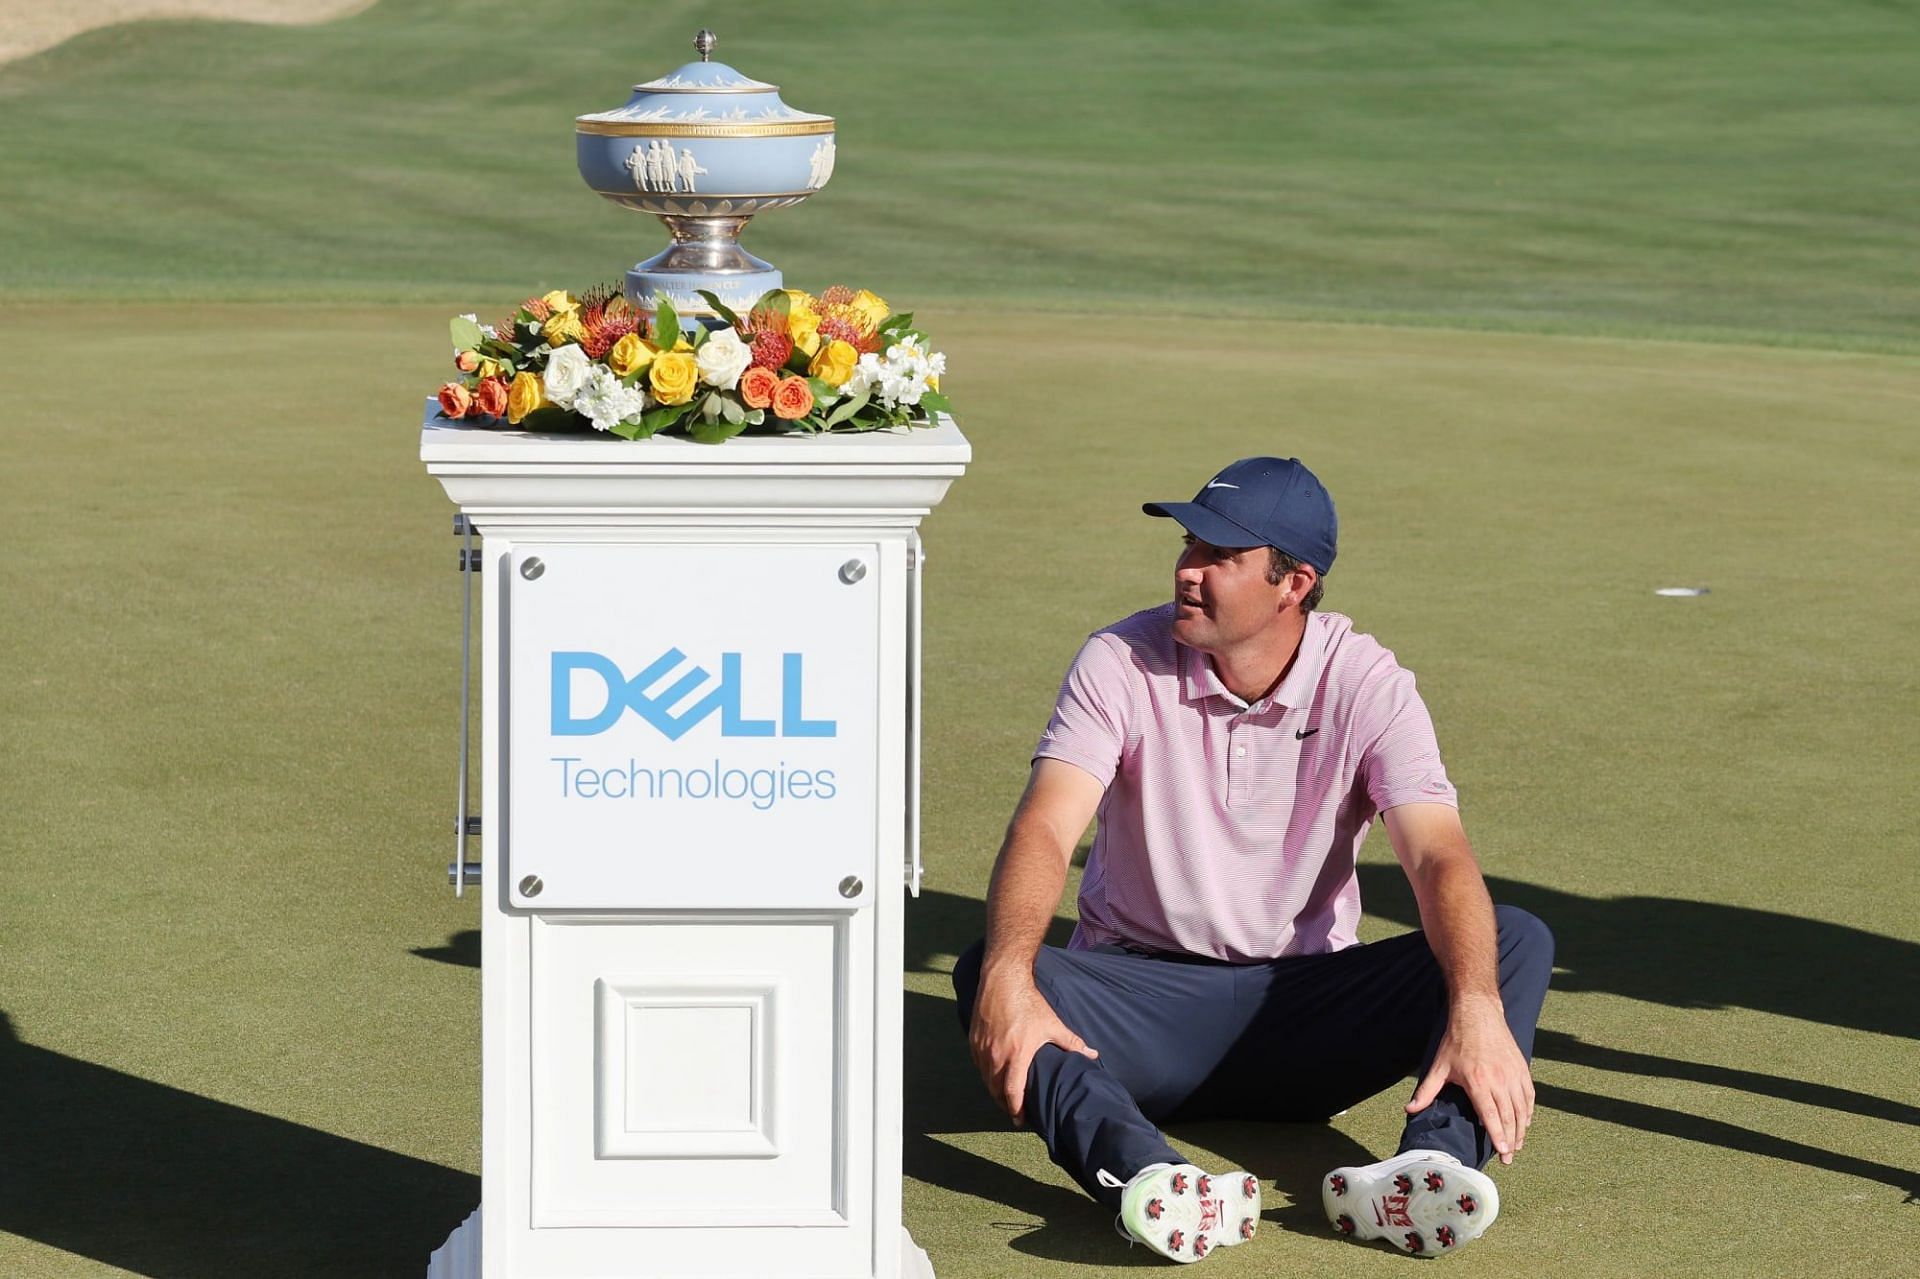 2023 WGC-Dell Match Play Day 2 tee times and TV Schedule